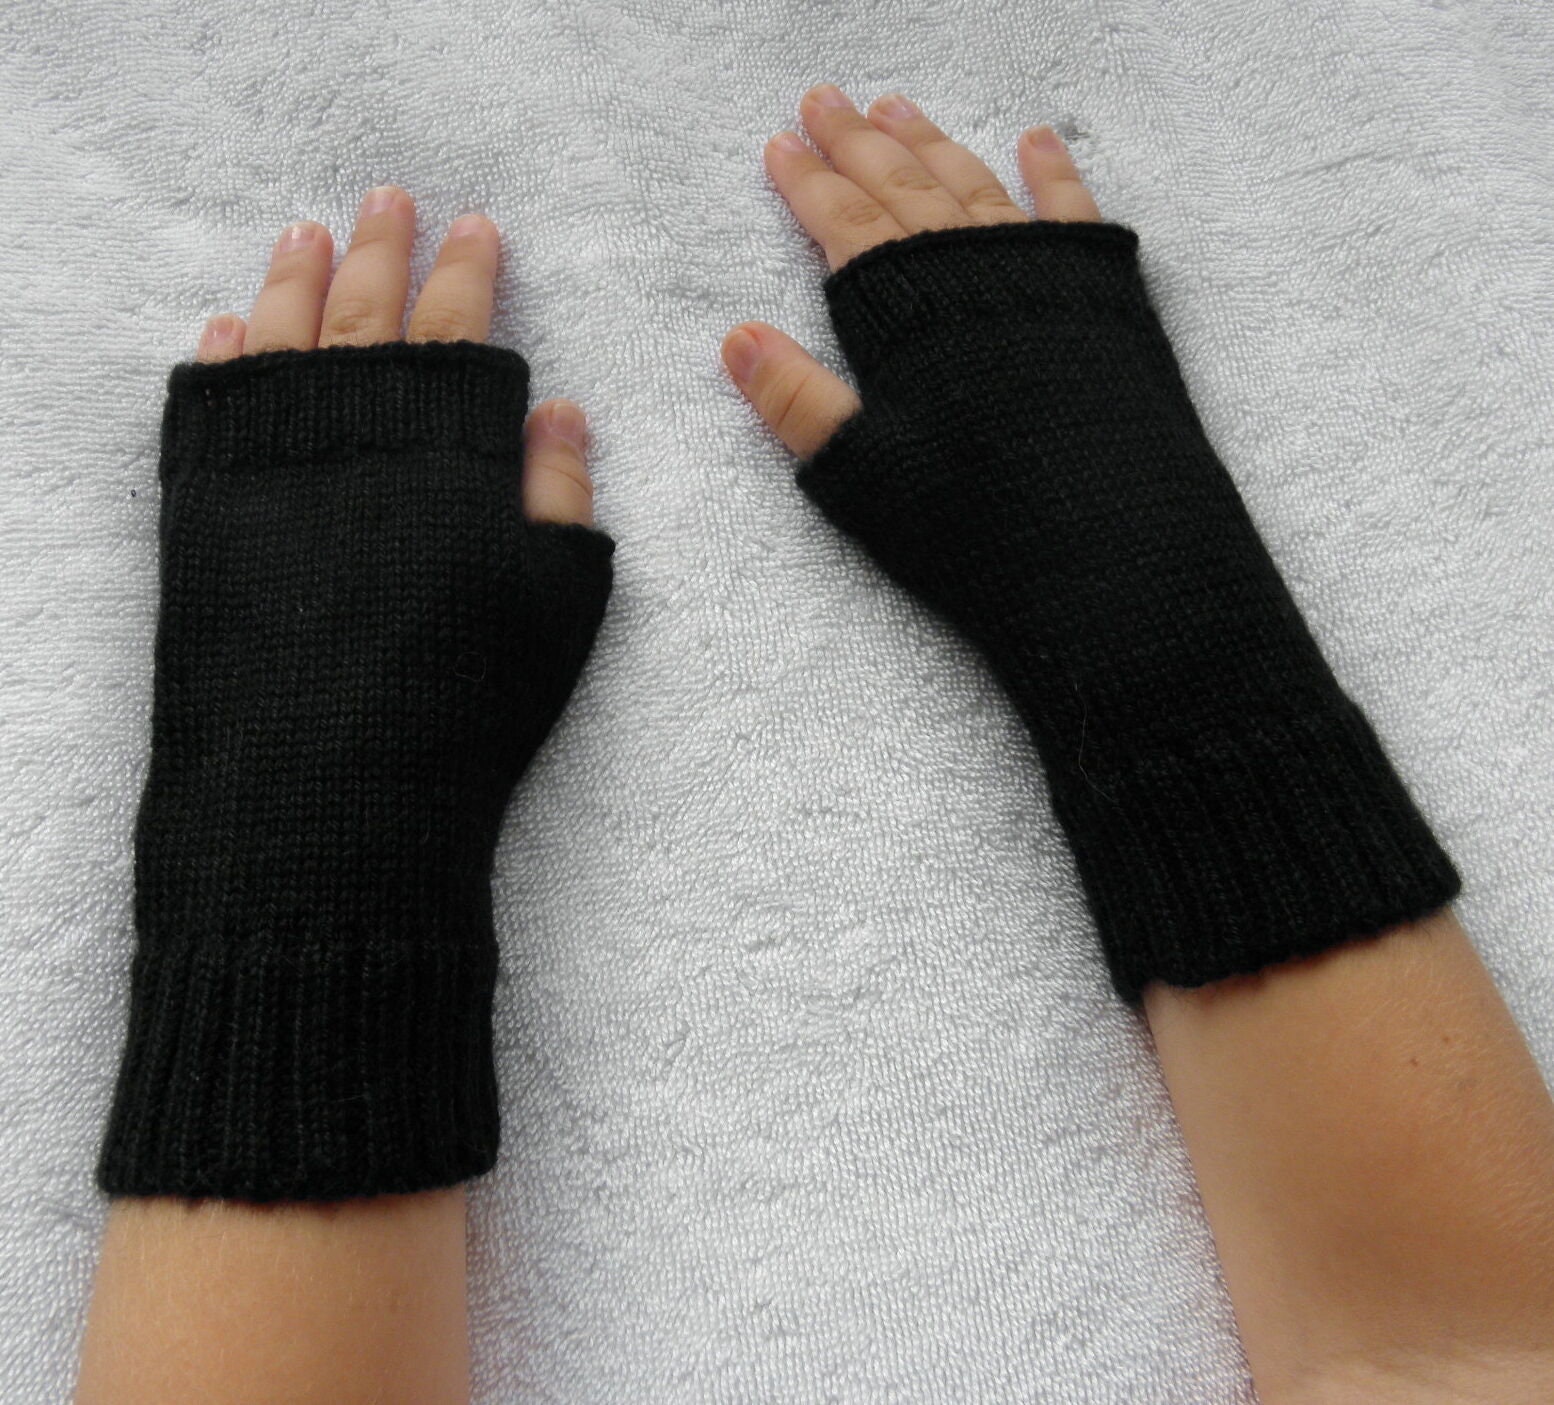 Brand New Alpaca Blended Wrist Warmers From Peru Petite, Child Size in Black